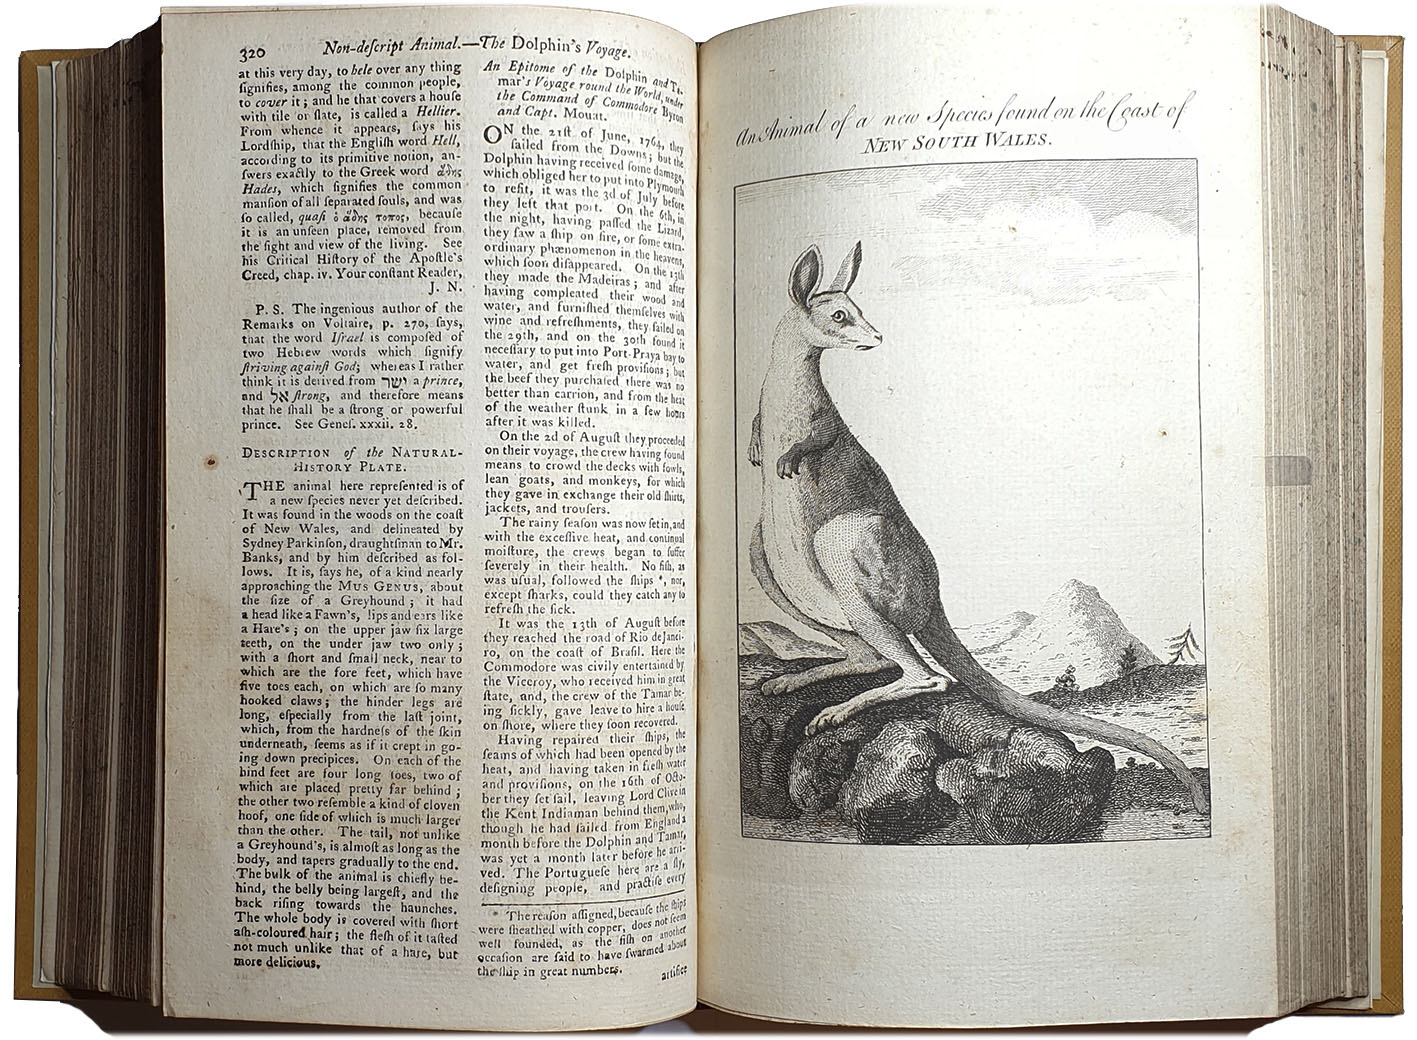 Anon. engraver after George Stubbs, An Animal of a New Species found on the Coast of New South Wales 1773 Gentleman’s Magazine p. 320. Private col.